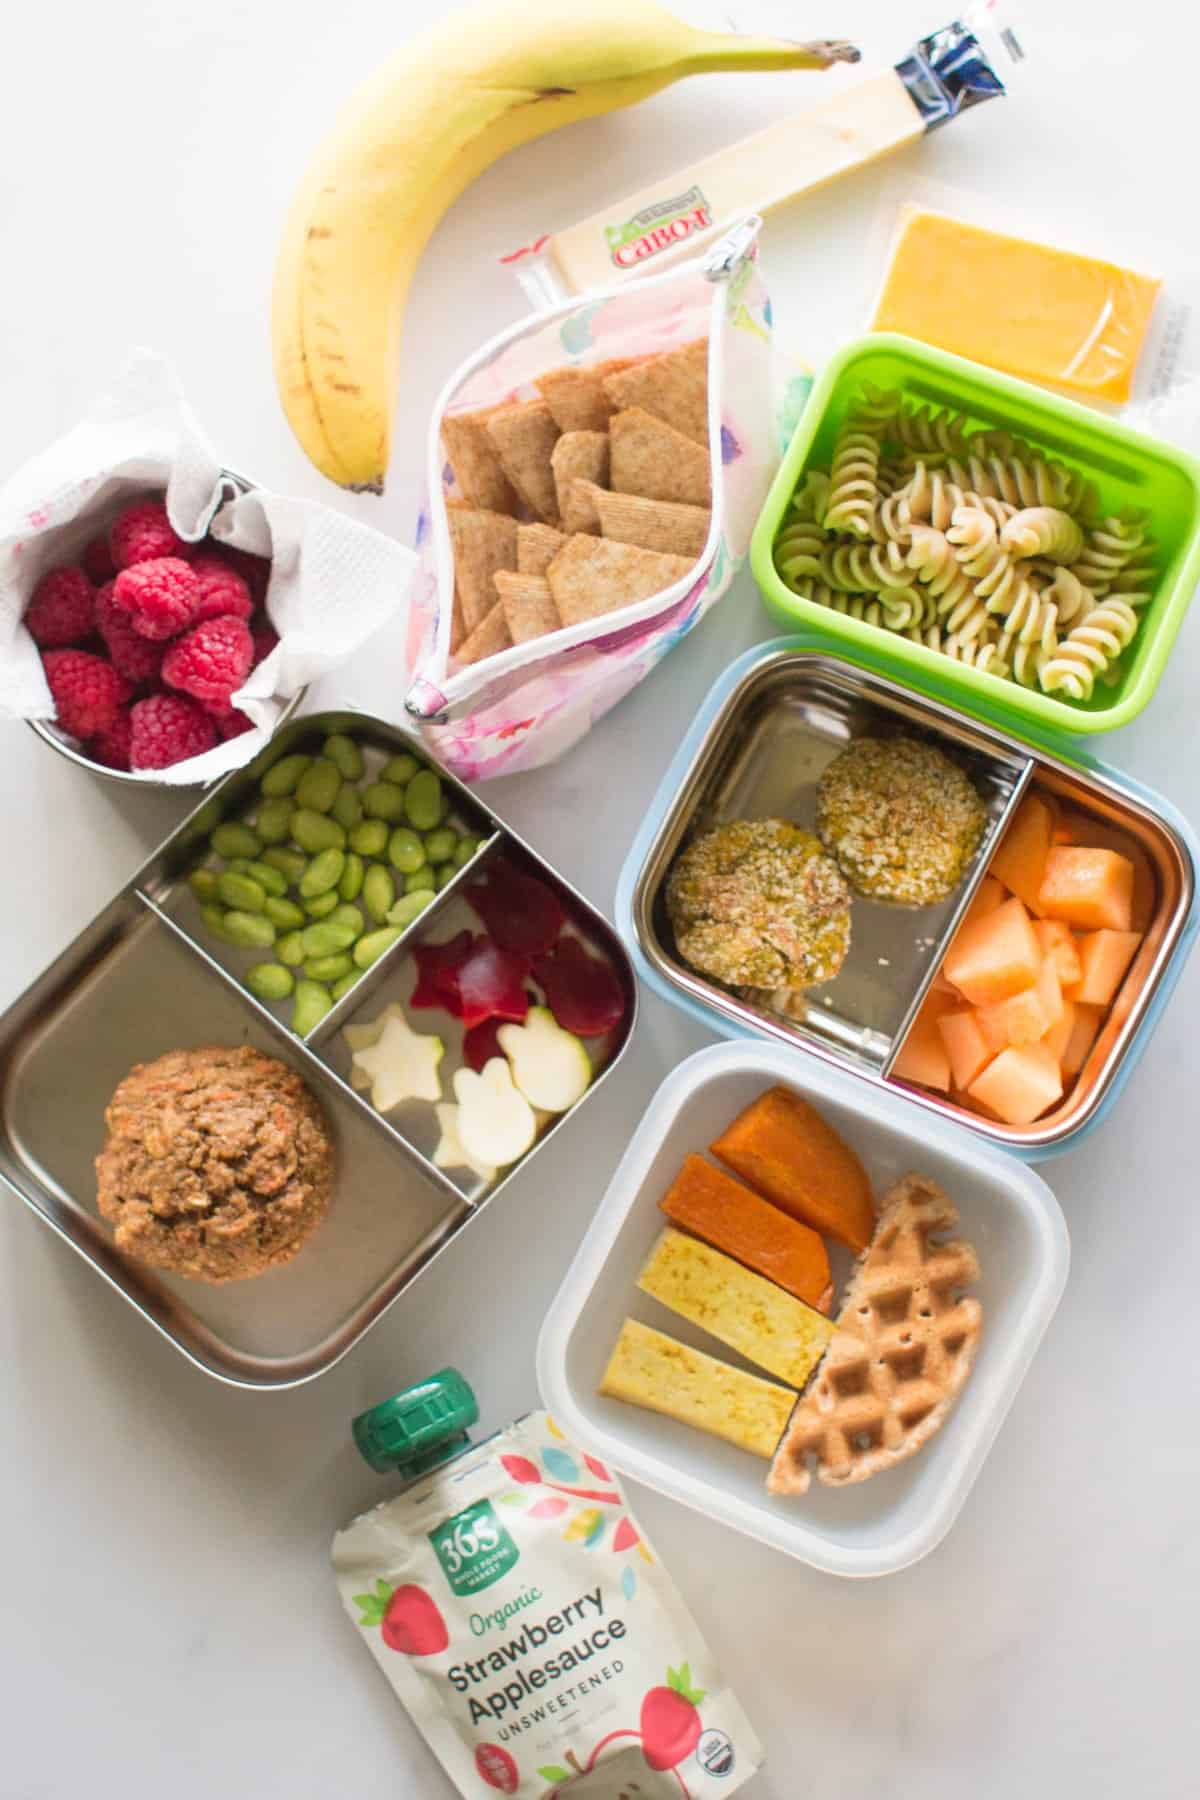 Easy travel snacks all laid out on a white background.